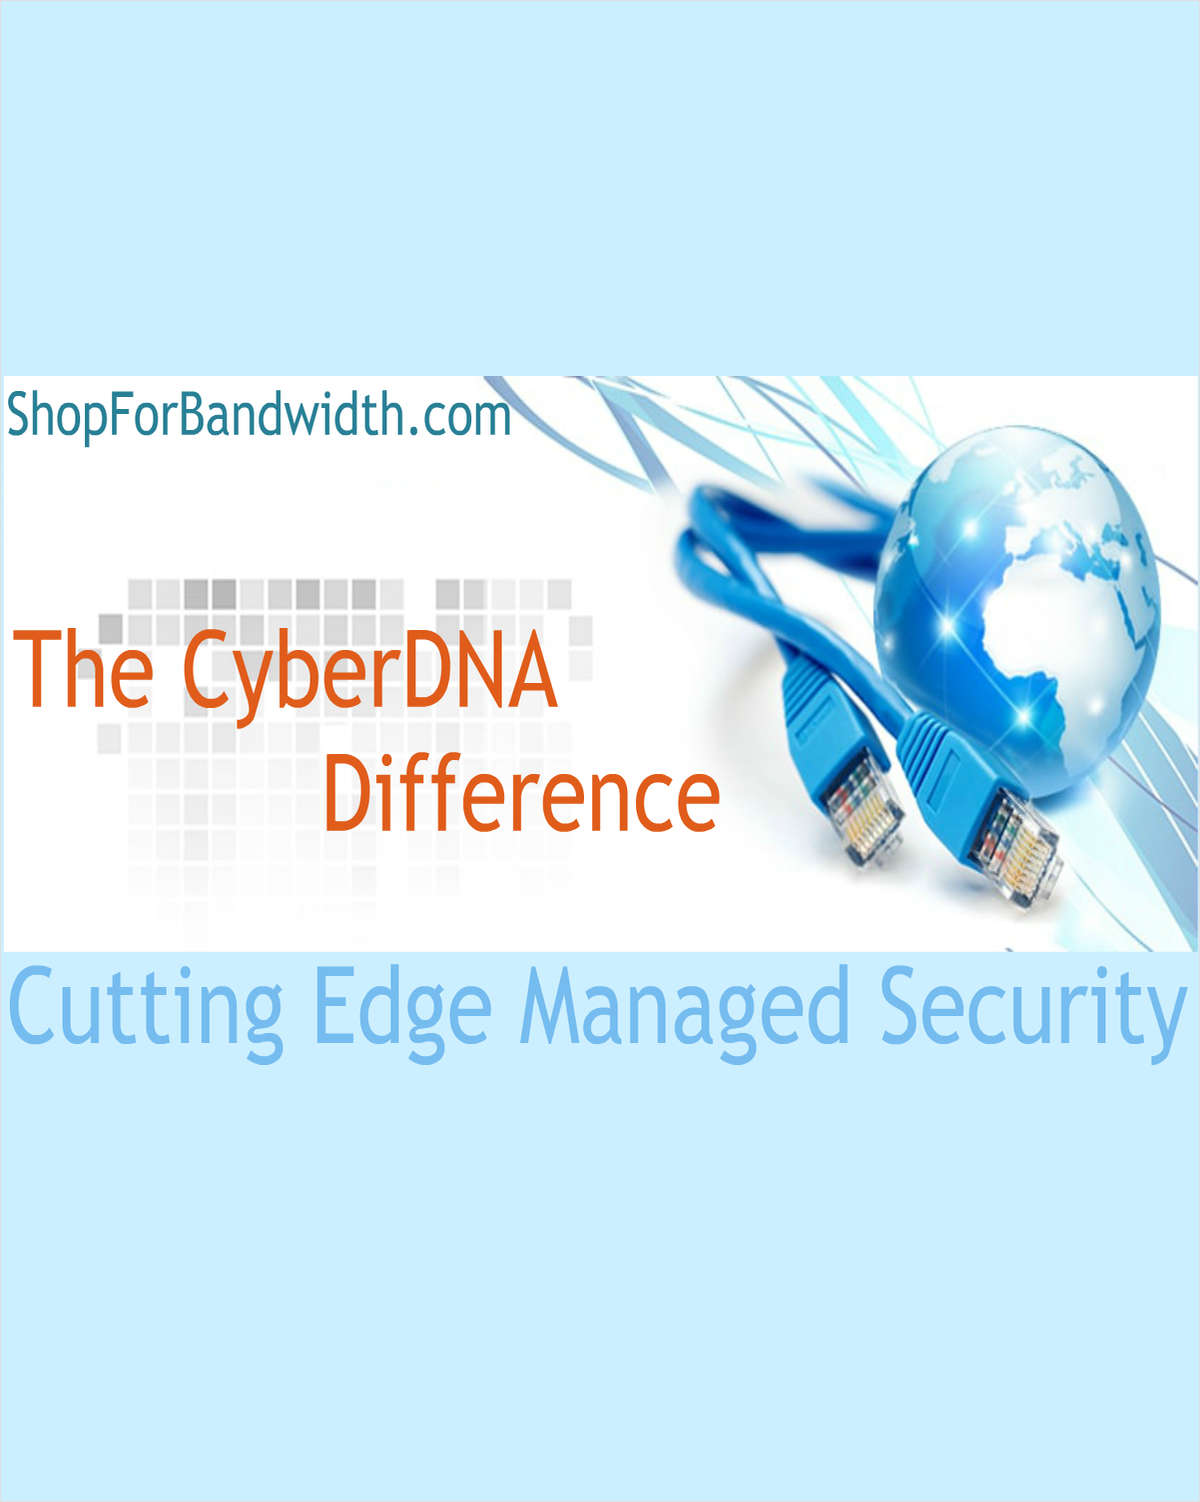 The Cutting Edge Managed Security Solution - The CyberDNA Difference